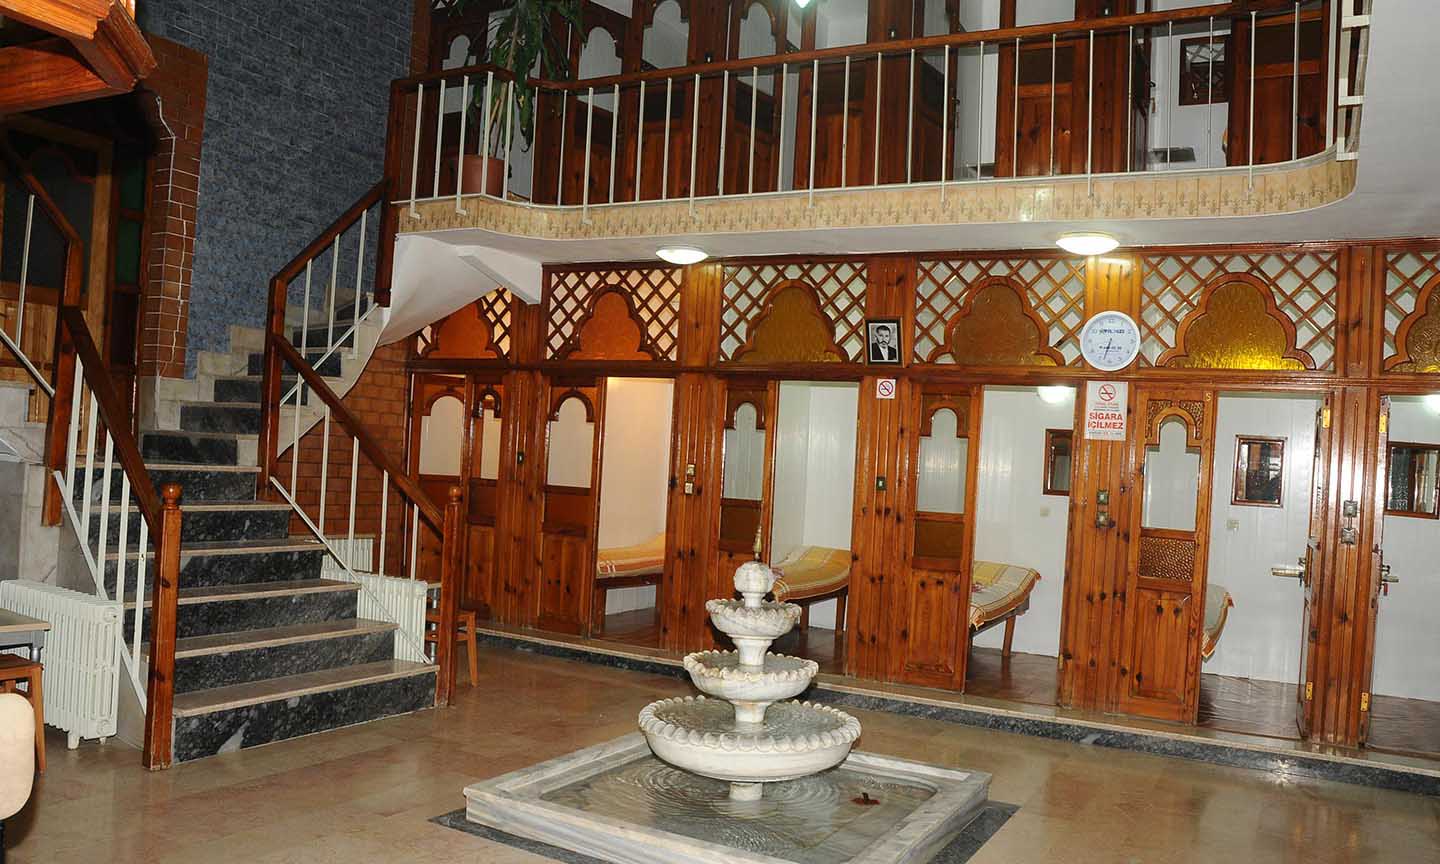 You are currently viewing Historical Turkish bath – Çinili Hamam